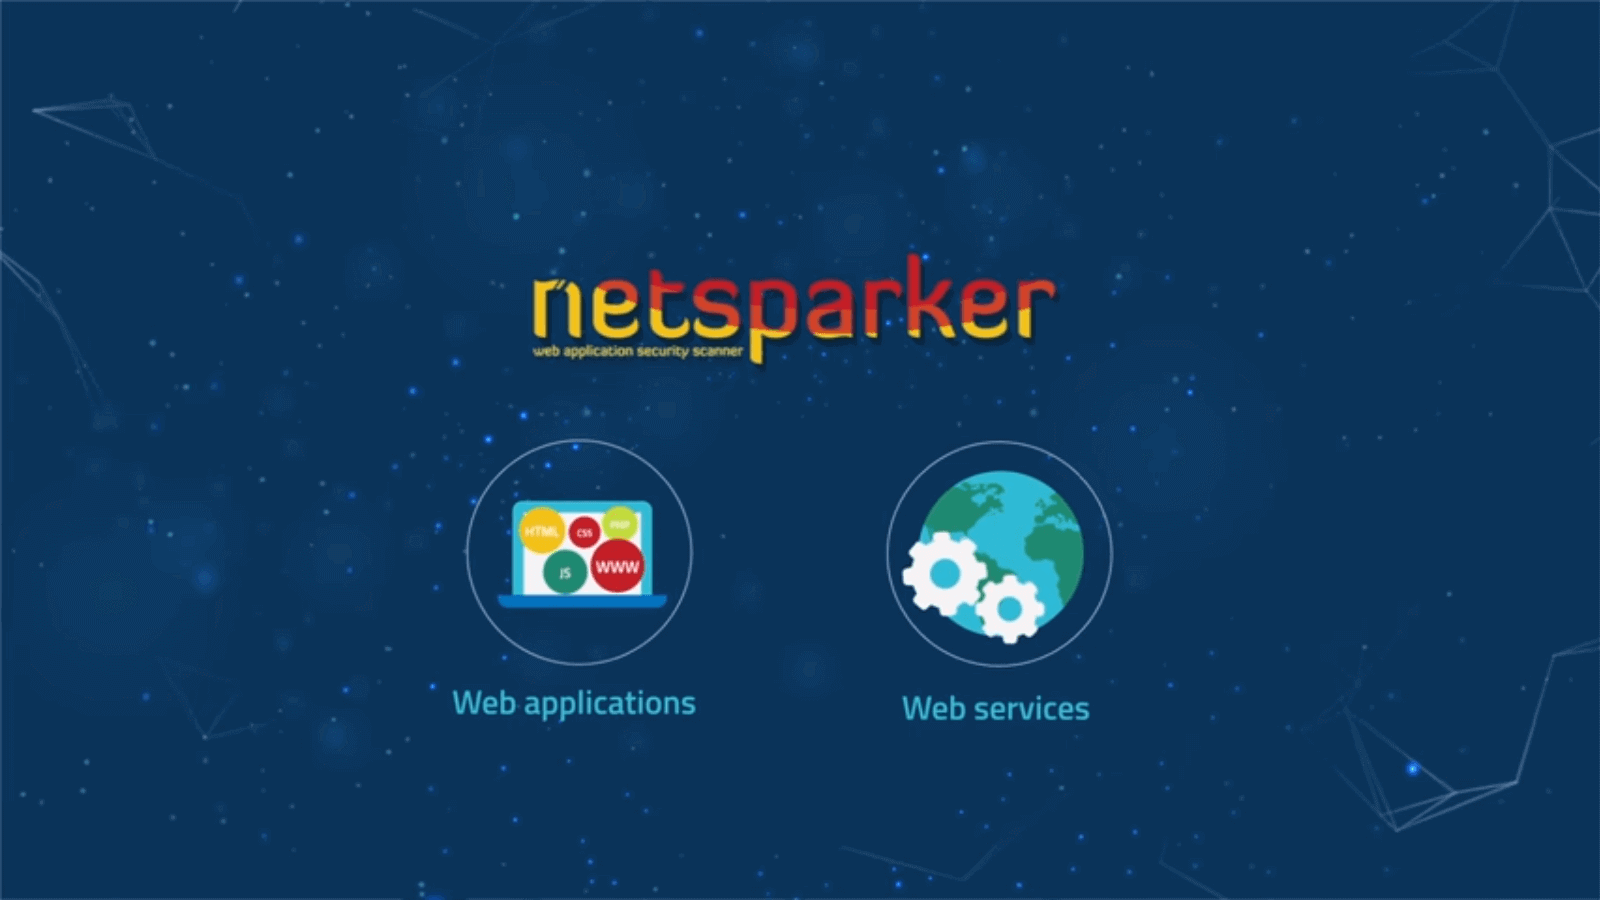 Digit Labs Web Application Security Scanners - Netsparker Standard